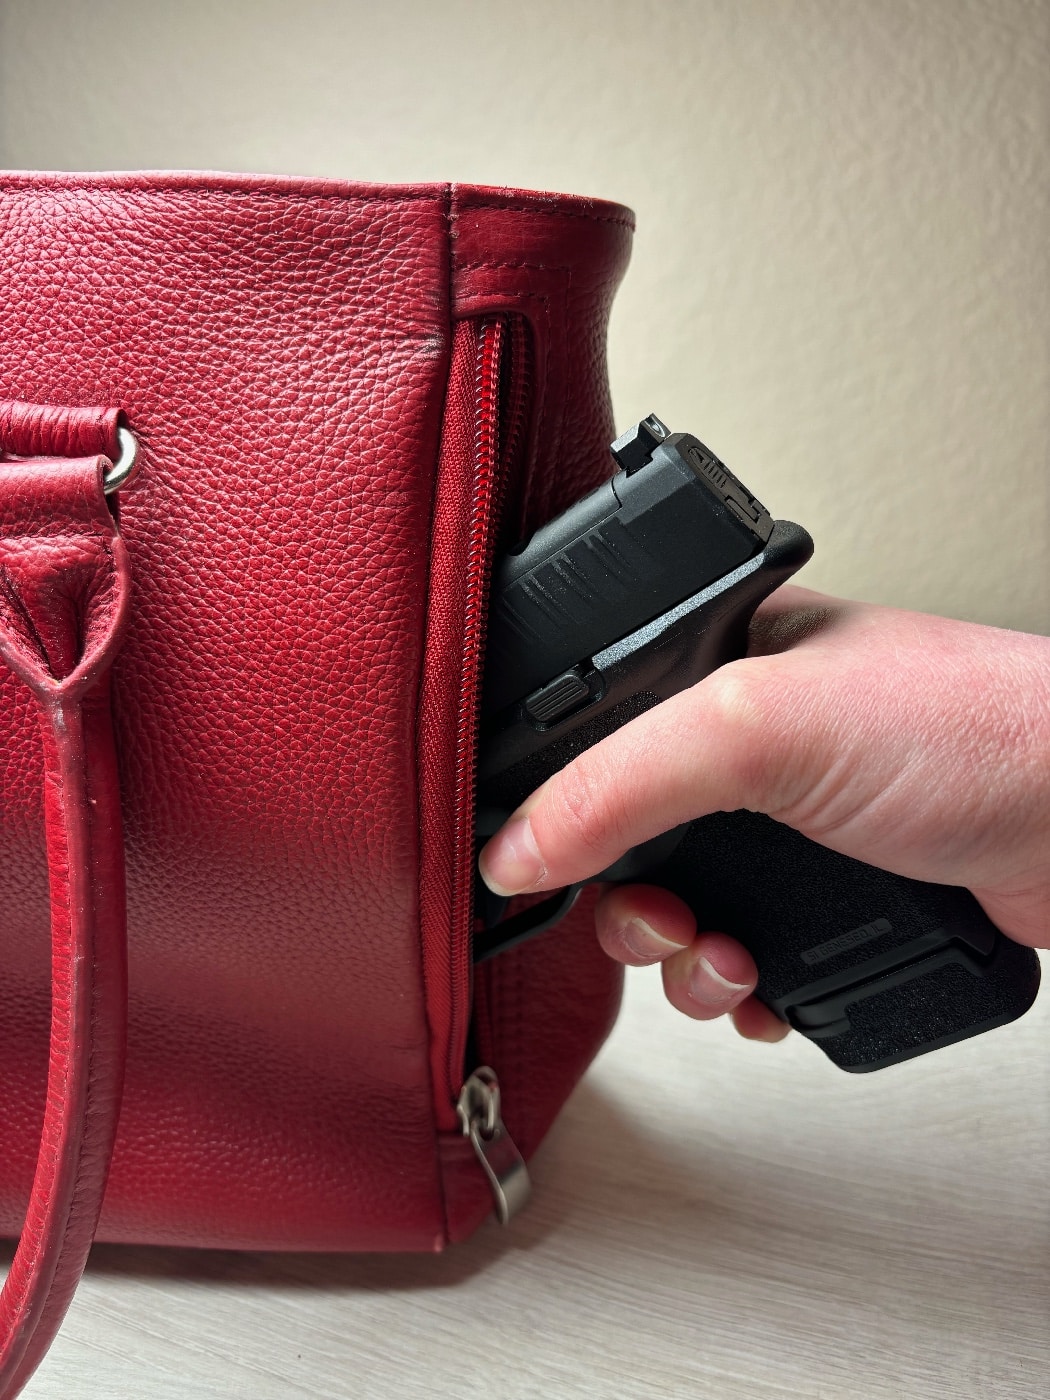 As shown here, the Springfield Armory Hellcat fits easily into a purse holster.